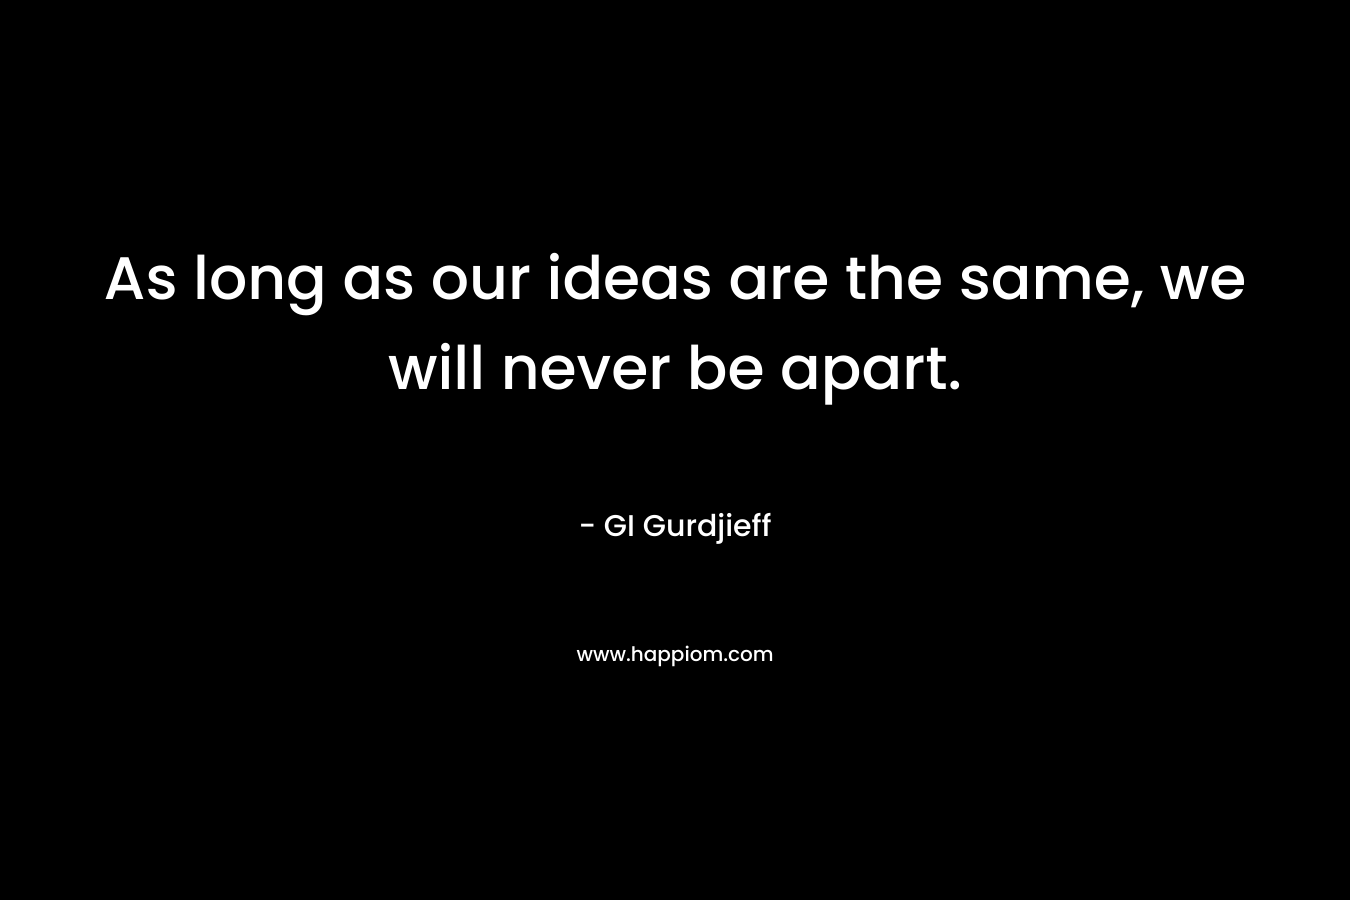 As long as our ideas are the same, we will never be apart. – GI Gurdjieff